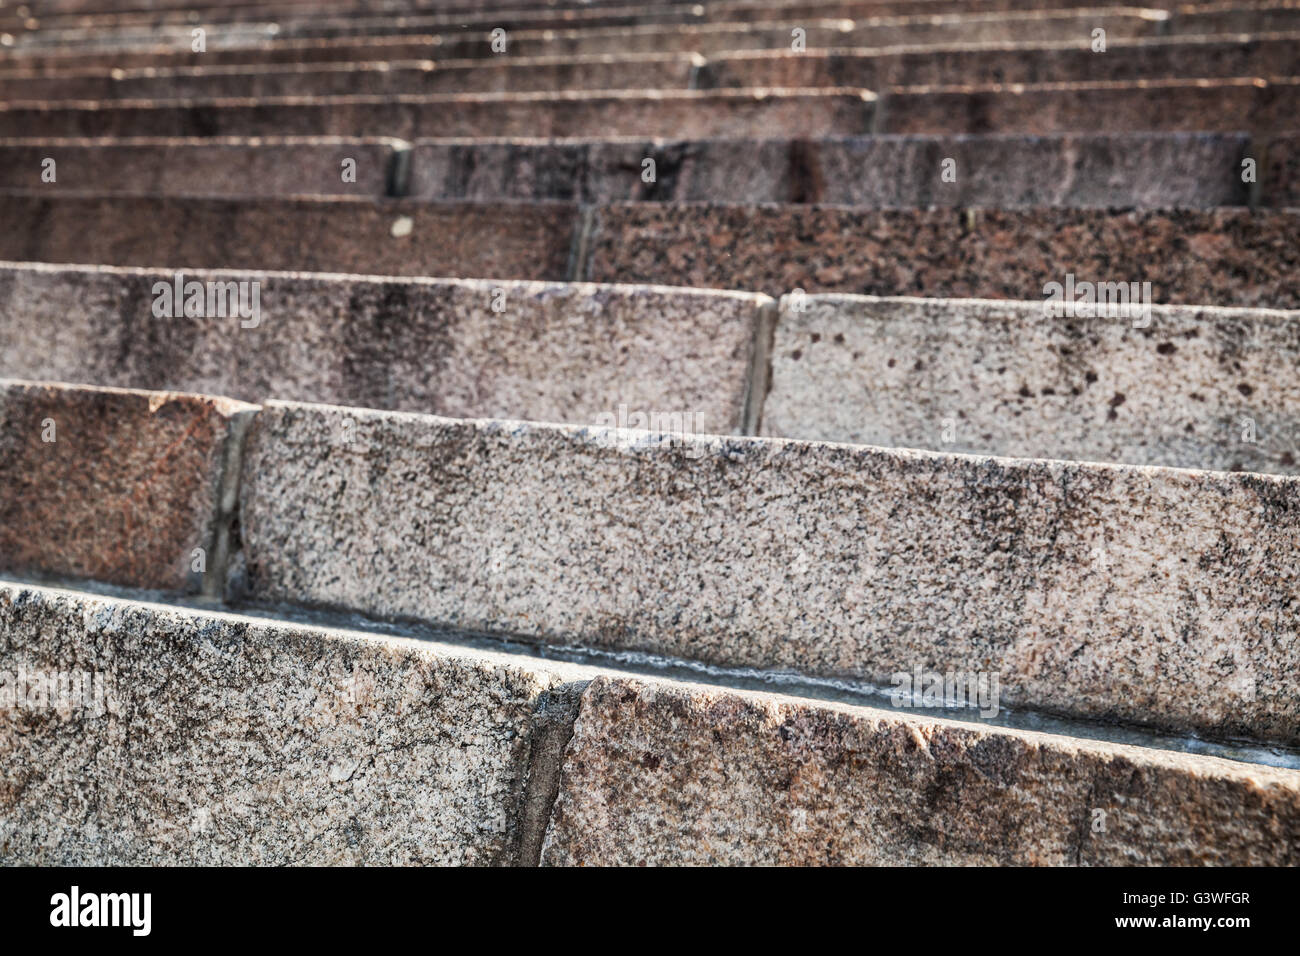 Abstract architecture fragment. Old stairway made of granite stone blocks, close-up photo with selective focus Stock Photo